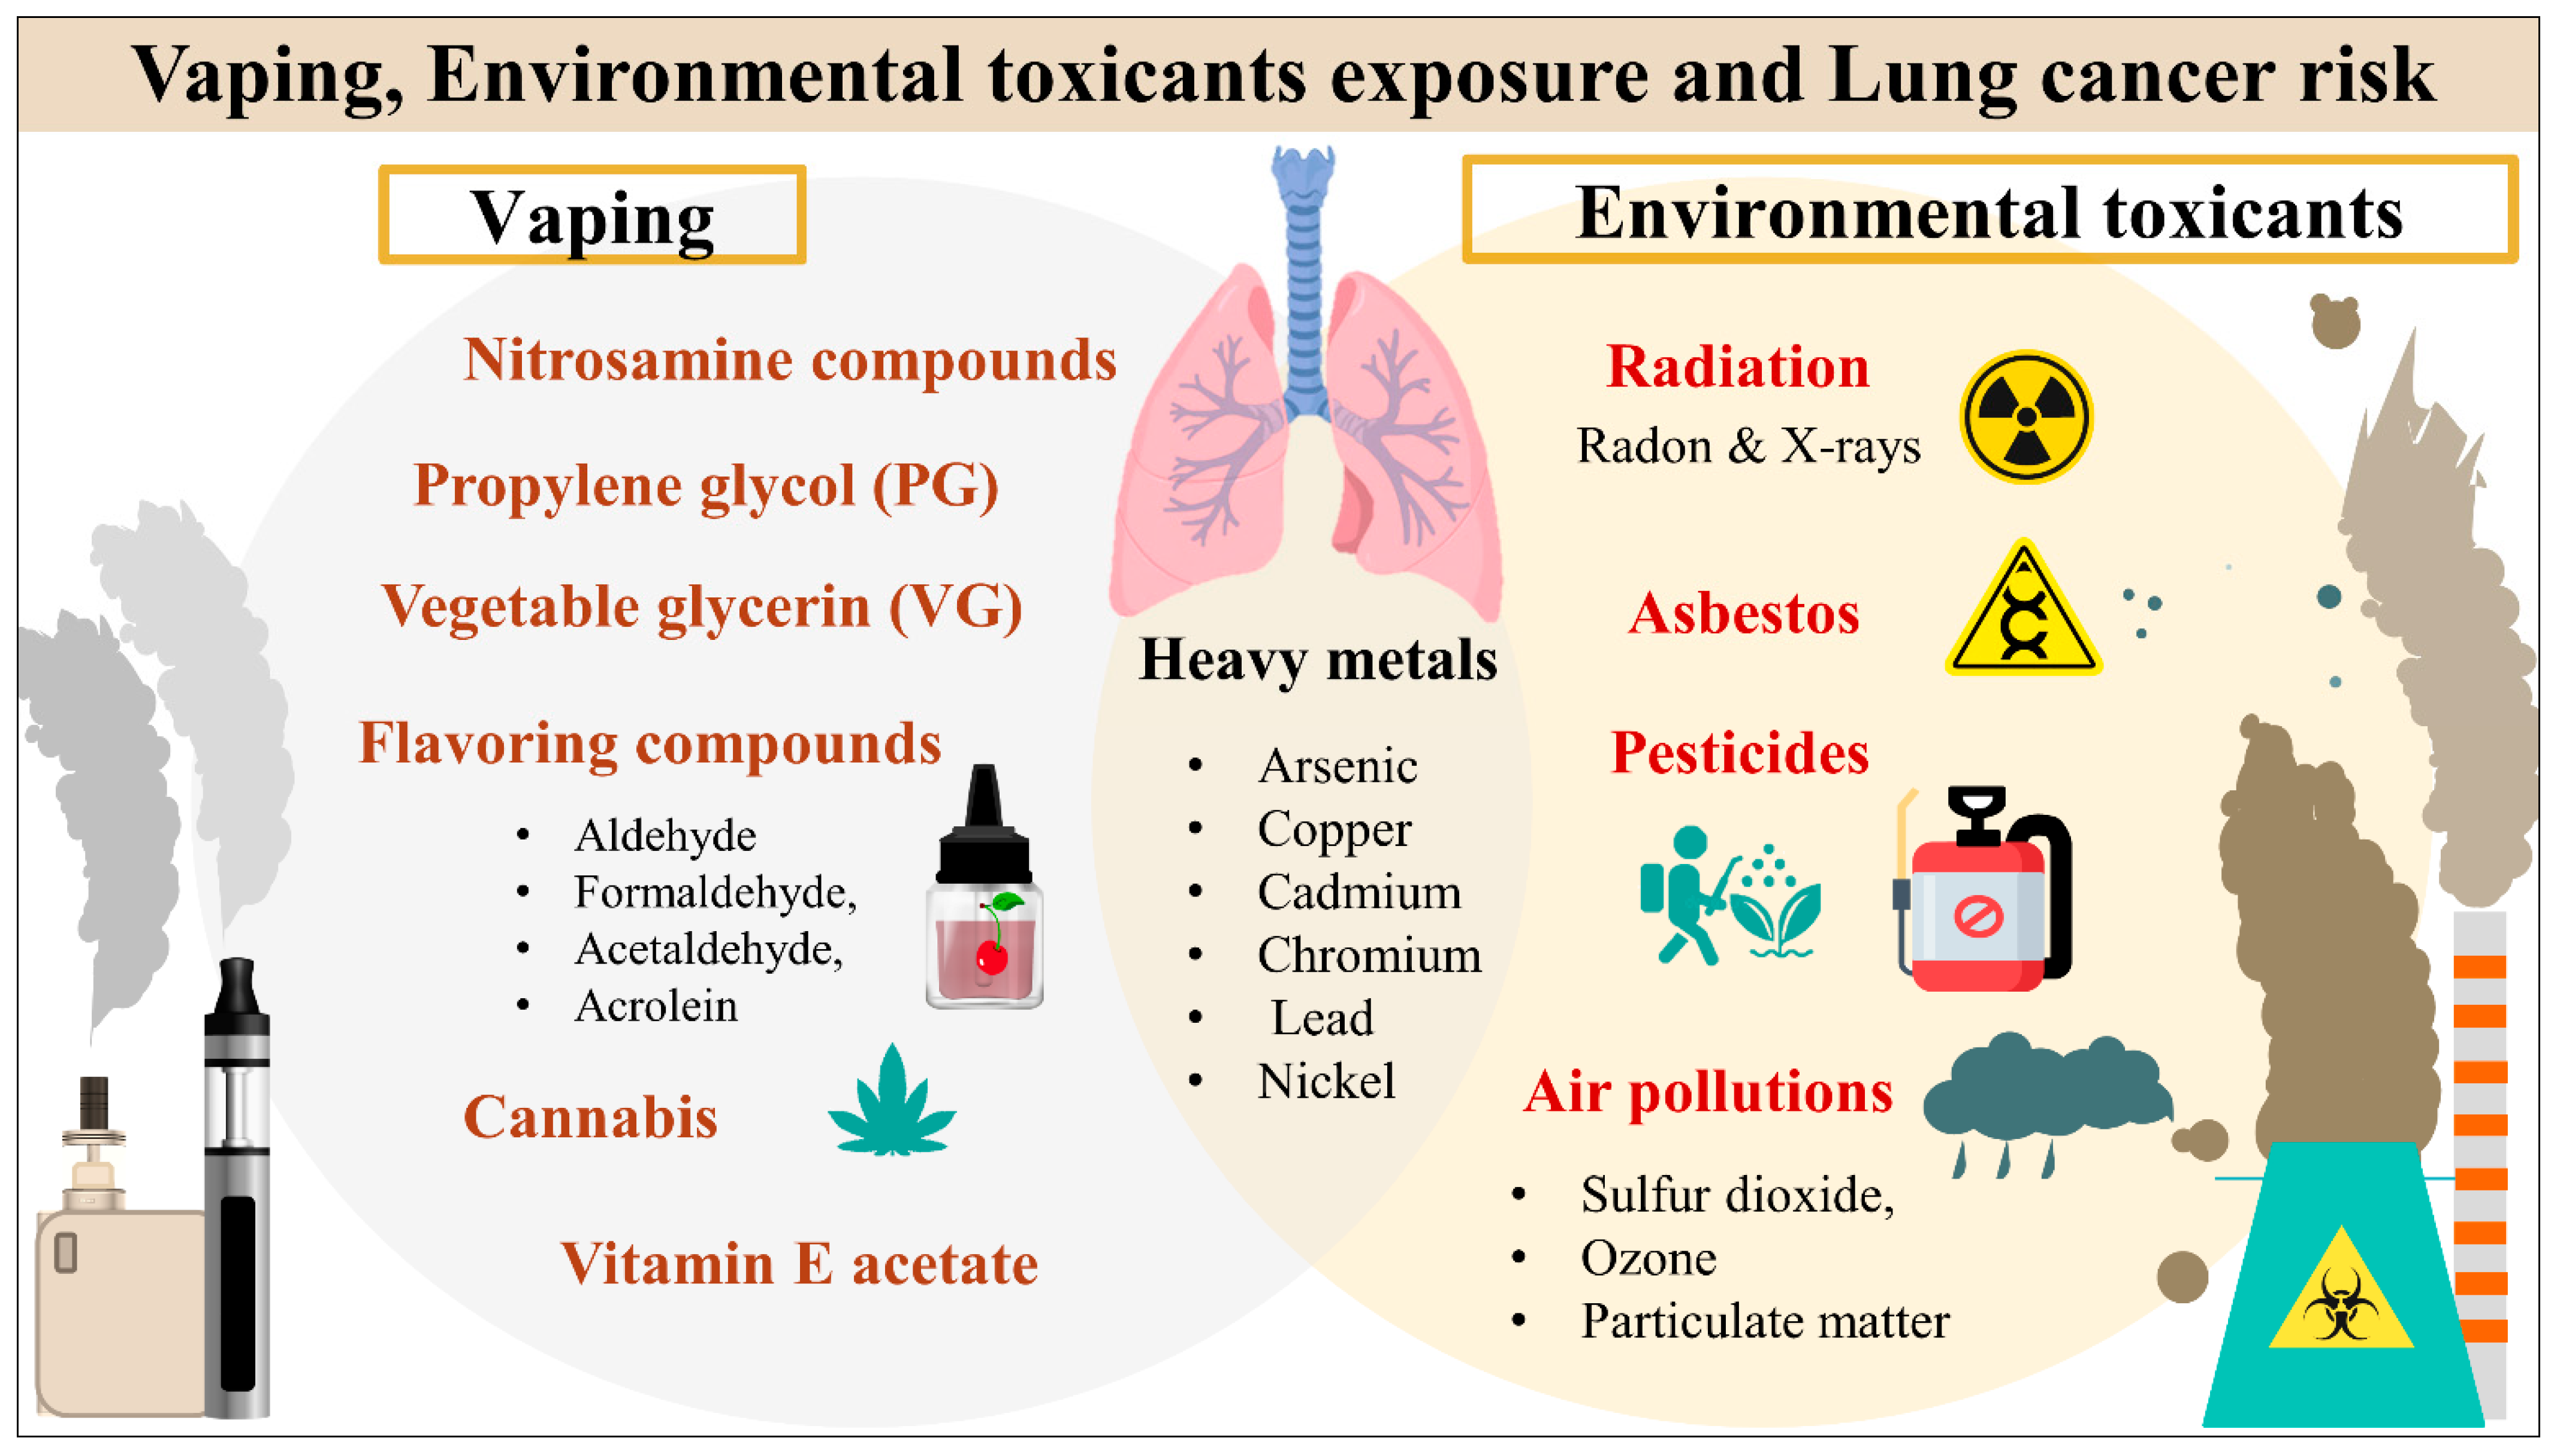 Cancers | Free Vaping, Toxicants Exposure, and Lung Cancer Risk